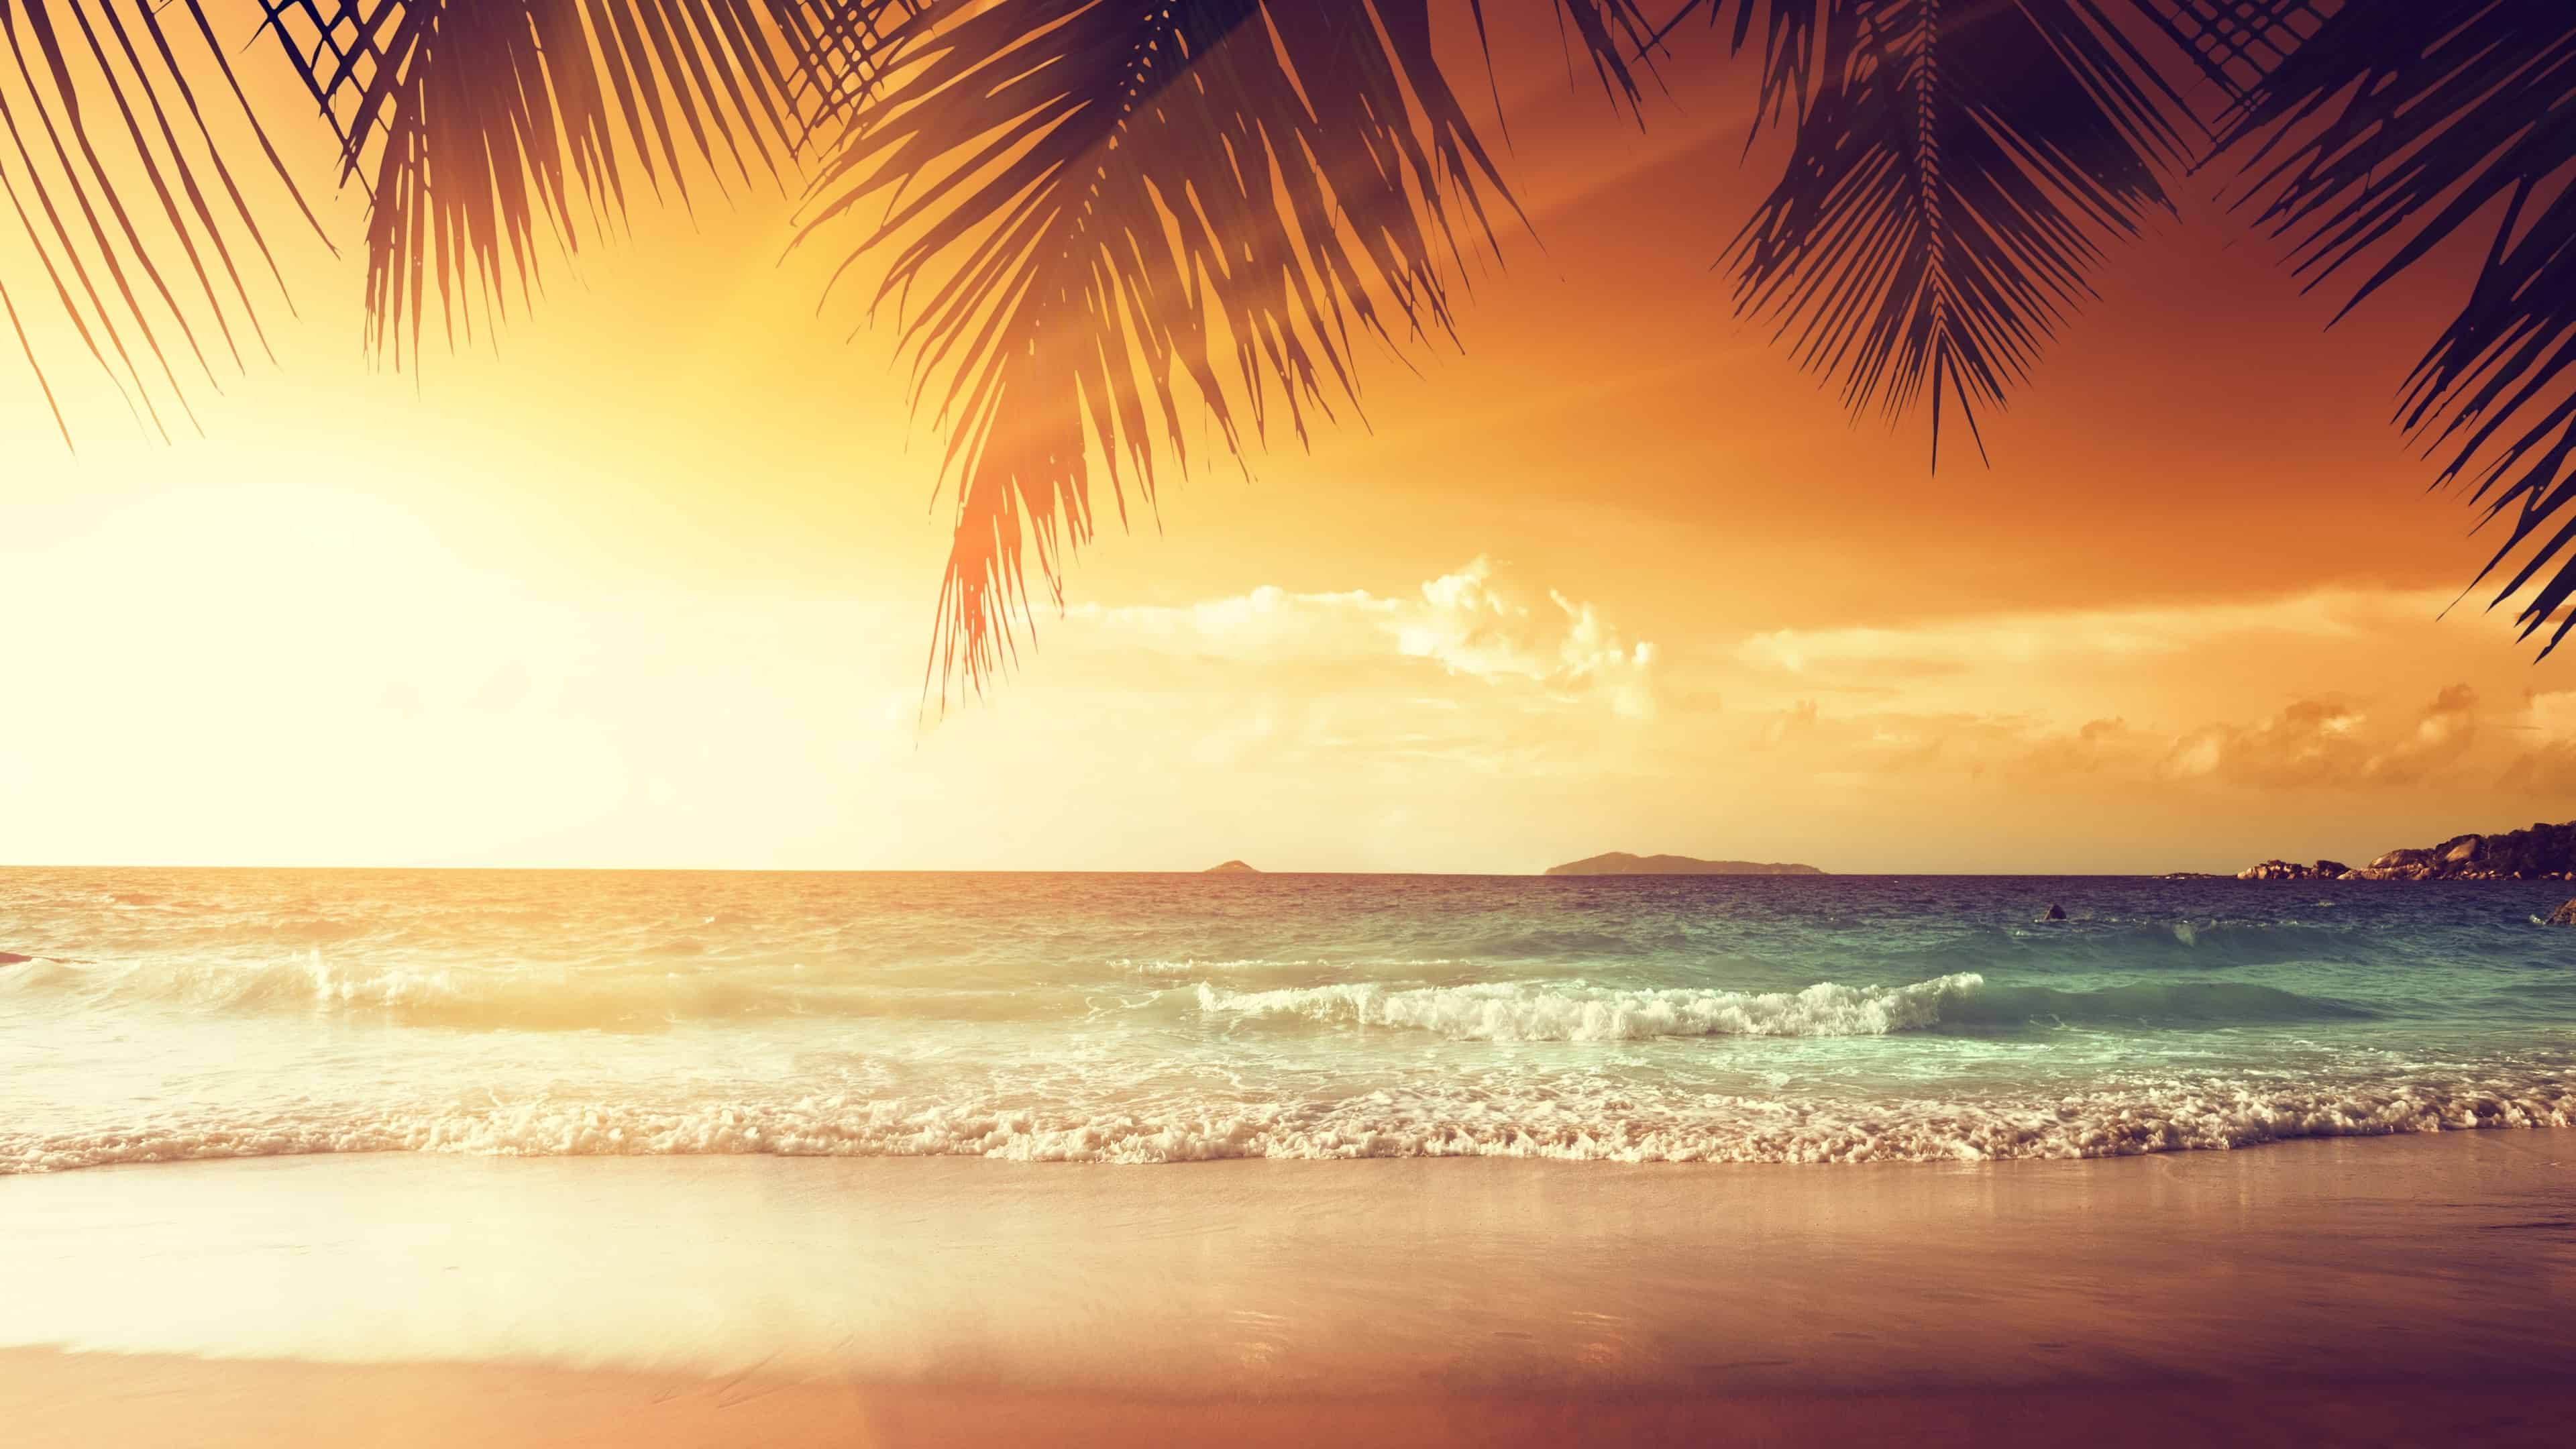 tropical beach with palm trees at sunset uhd 4k Wallpapers Download